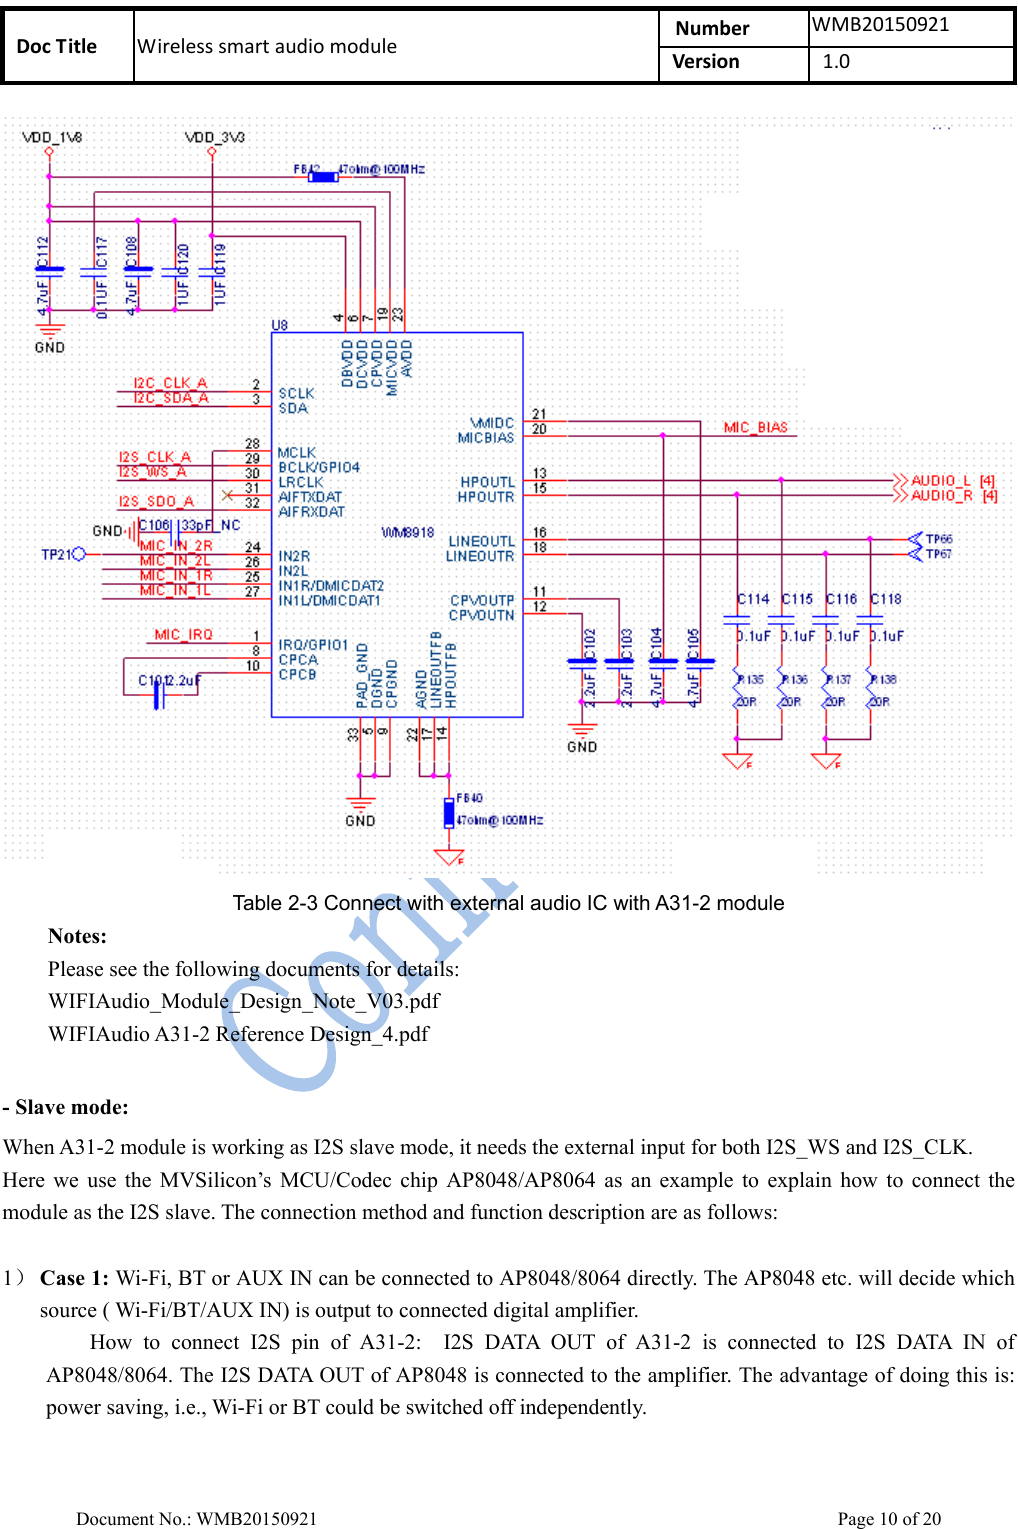    DocTitle Wirelesssmartaudiomodule Number WMB20150921Version 1.0 Document No.: WMB20150921    Page 10 of 20  Table 2-3 Connect with external audio IC with A31-2 module Notes: Please see the following documents for details: WIFIAudio_Module_Design_Note_V03.pdf WIFIAudio A31-2 Reference Design_4.pdf  - Slave mode: When A31-2 module is working as I2S slave mode, it needs the external input for both I2S_WS and I2S_CLK. Here  we  use  the  MVSilicon’s  MCU/Codec  chip  AP8048/AP8064  as  an  example  to  explain  how  to  connect  the module as the I2S slave. The connection method and function description are as follows:  1） Case 1: Wi-Fi, BT or AUX IN can be connected to AP8048/8064 directly. The AP8048 etc. will decide which source ( Wi-Fi/BT/AUX IN) is output to connected digital amplifier.   How to connect I2S pin of A31-2:  I2S DATA OUT of A31-2 is connected to I2S DATA IN of AP8048/8064. The I2S DATA OUT of AP8048 is connected to the amplifier. The advantage of doing this is: power saving, i.e., Wi-Fi or BT could be switched off independently.  